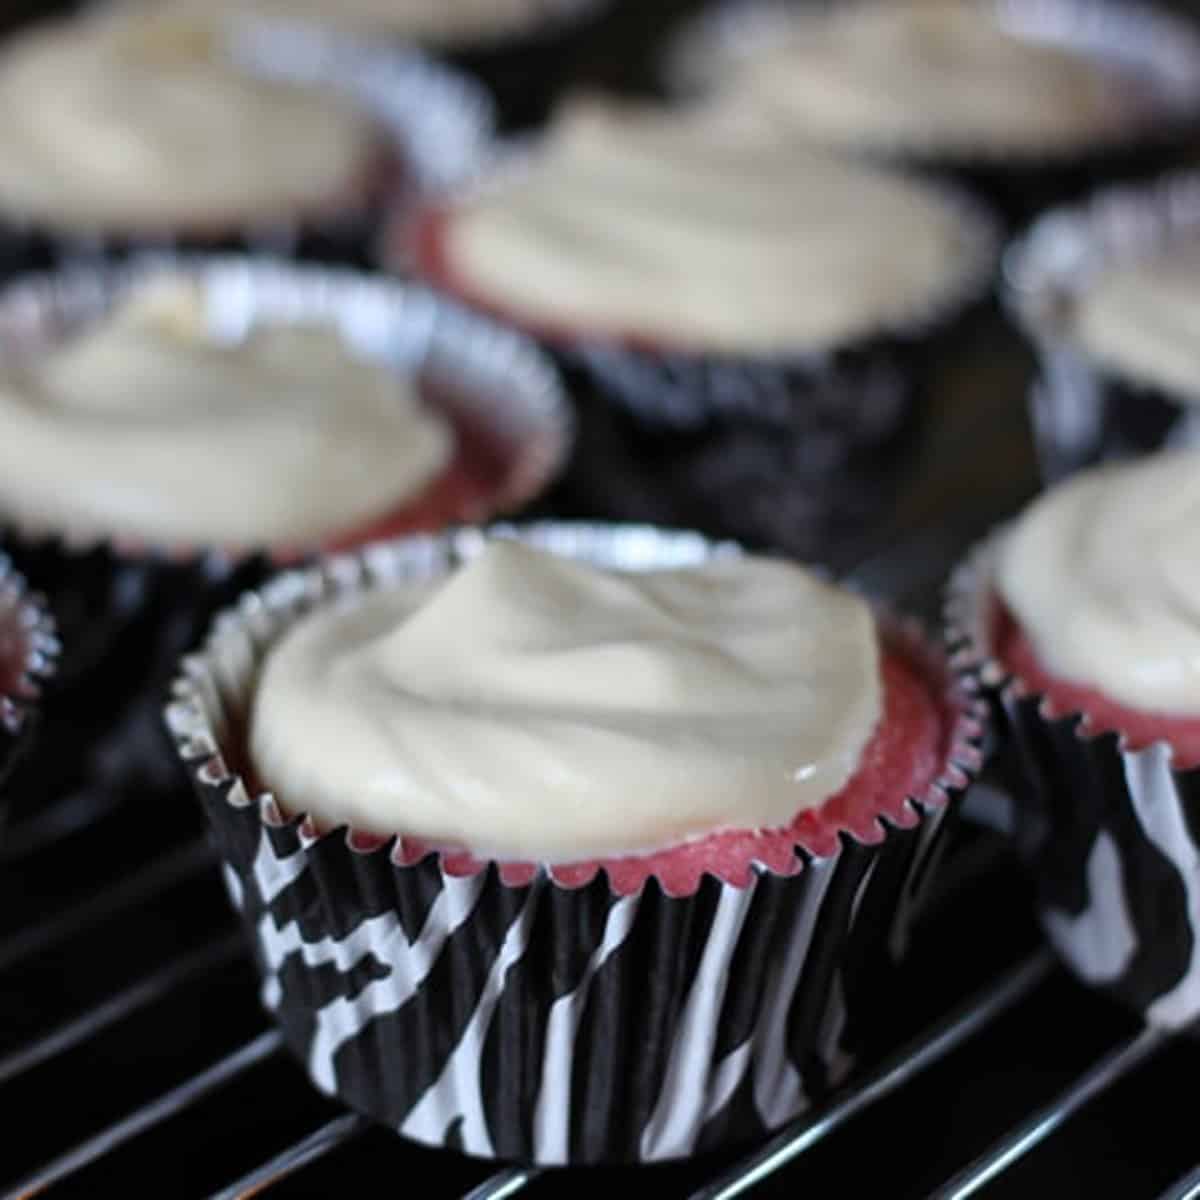 Cupcake topped with cool whip frosting.